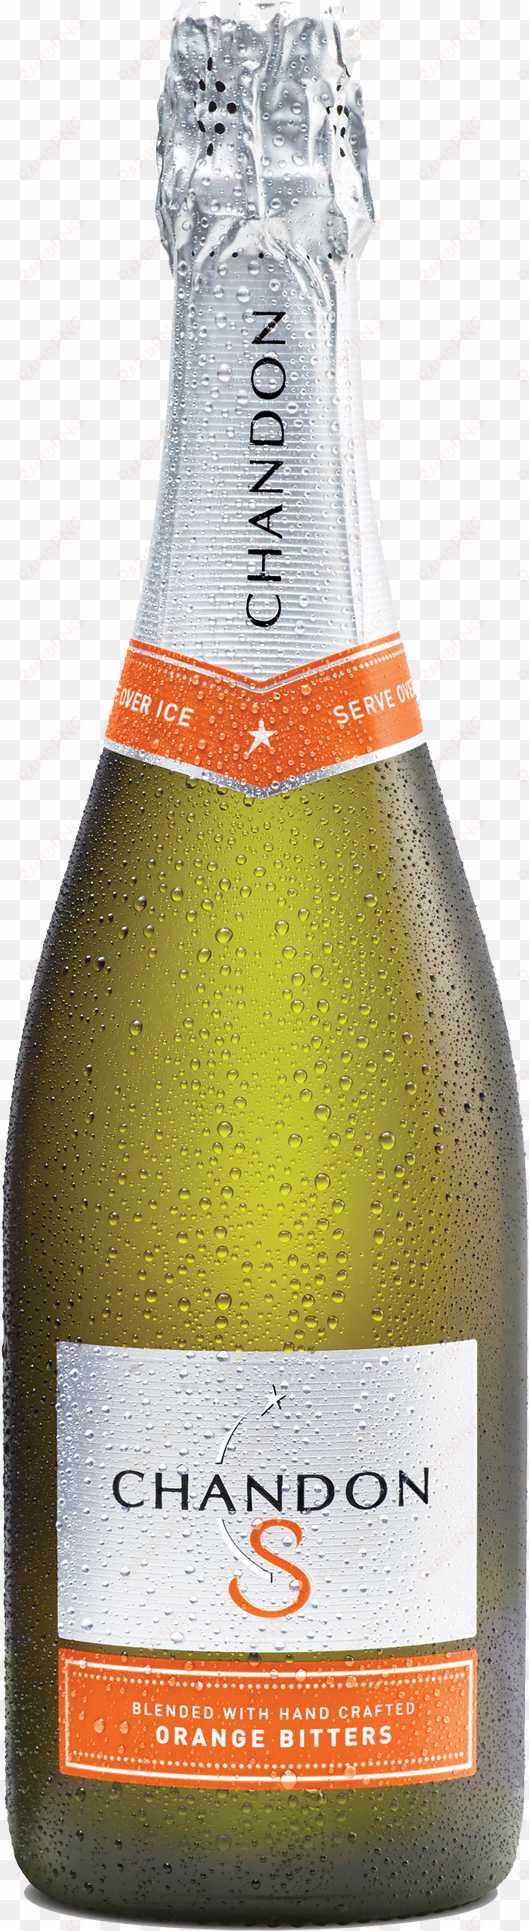 chandon s sparkling blended with hand crafted orange - chandon s sparkling with orange bitters